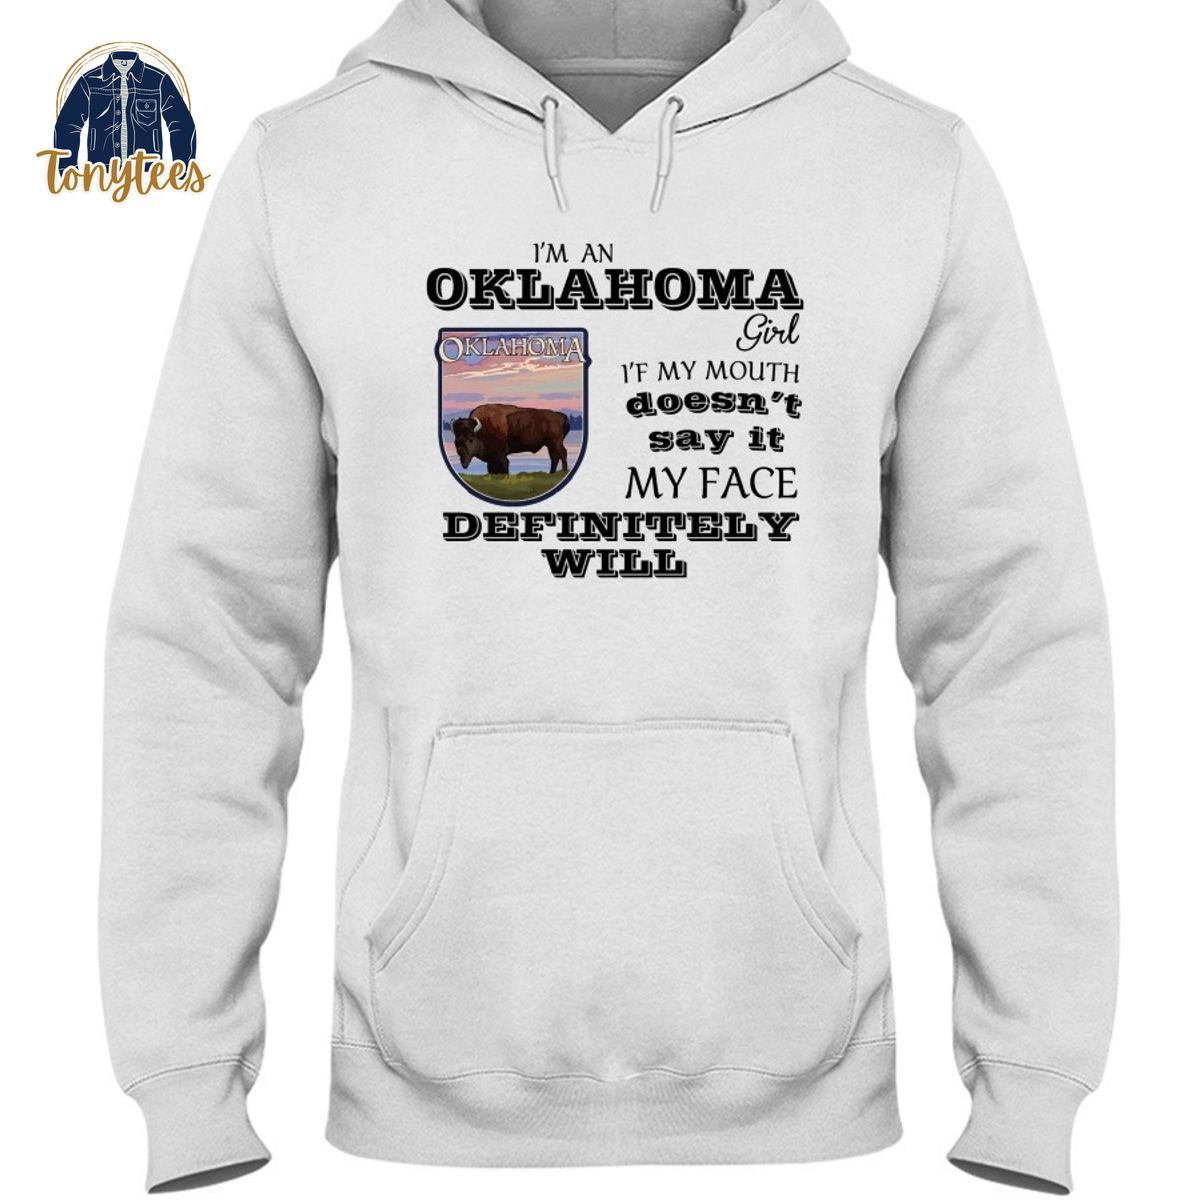 I am a Oklahoma girl if my mouth doesn’t say it my face definitely will shirt